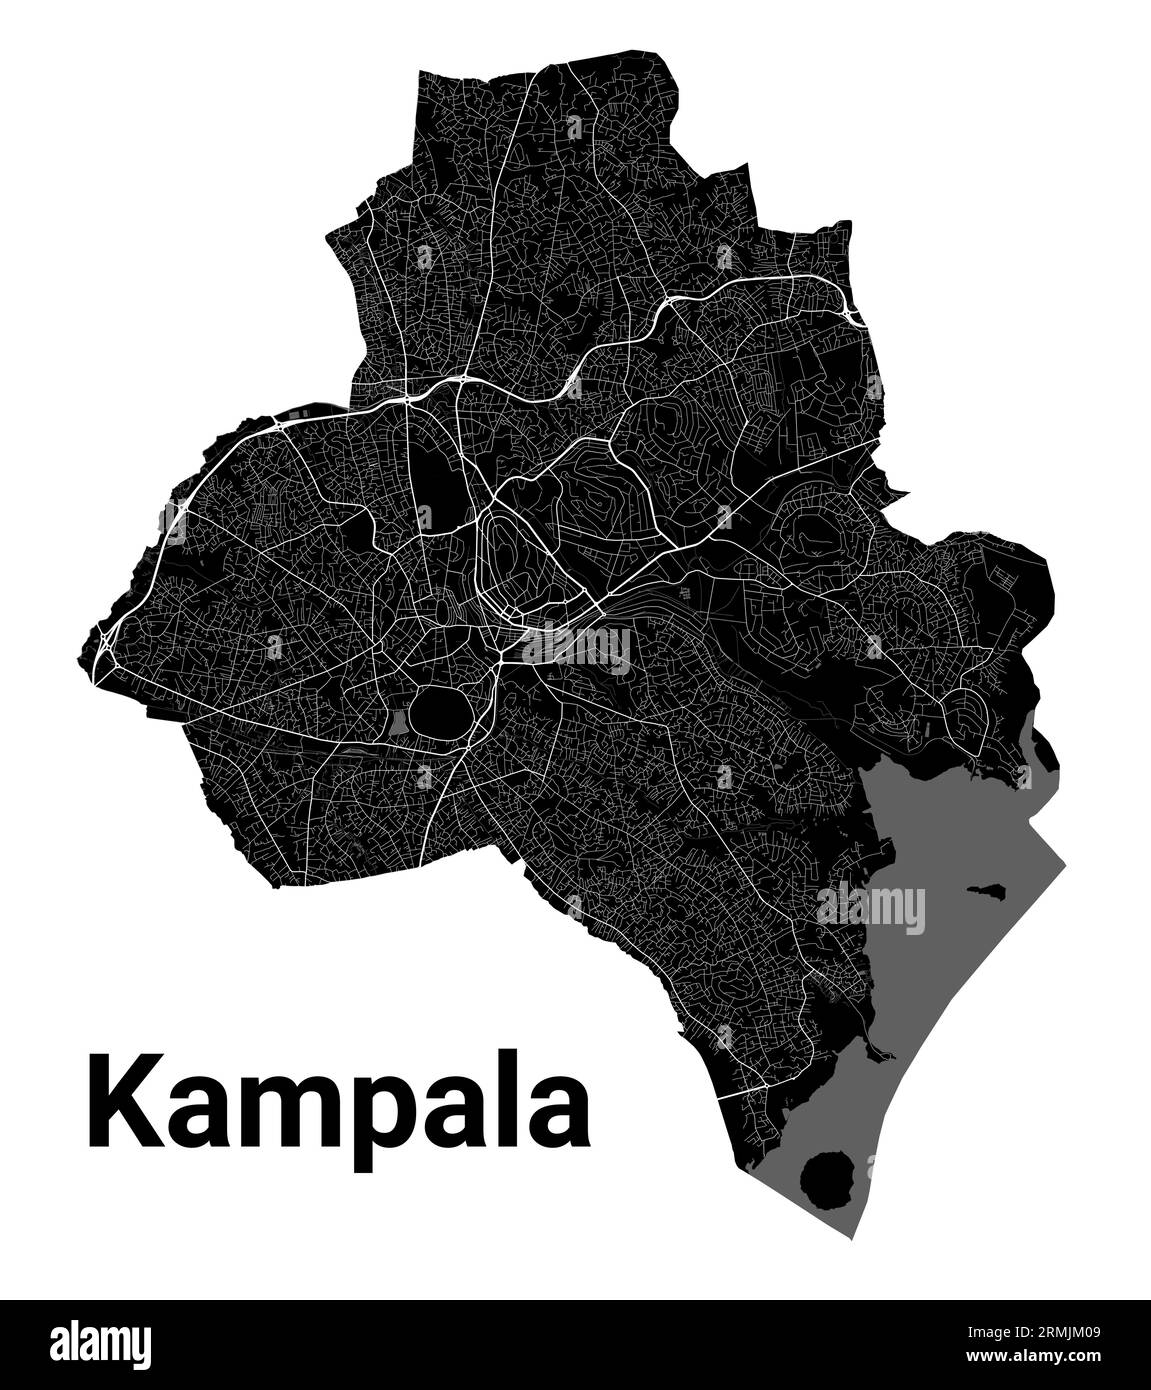 Kampala, Uganda map. Detailed black map of Kampala city administrative area. Cityscape poster metropolitan aria view. Black land with white roads and Stock Vector